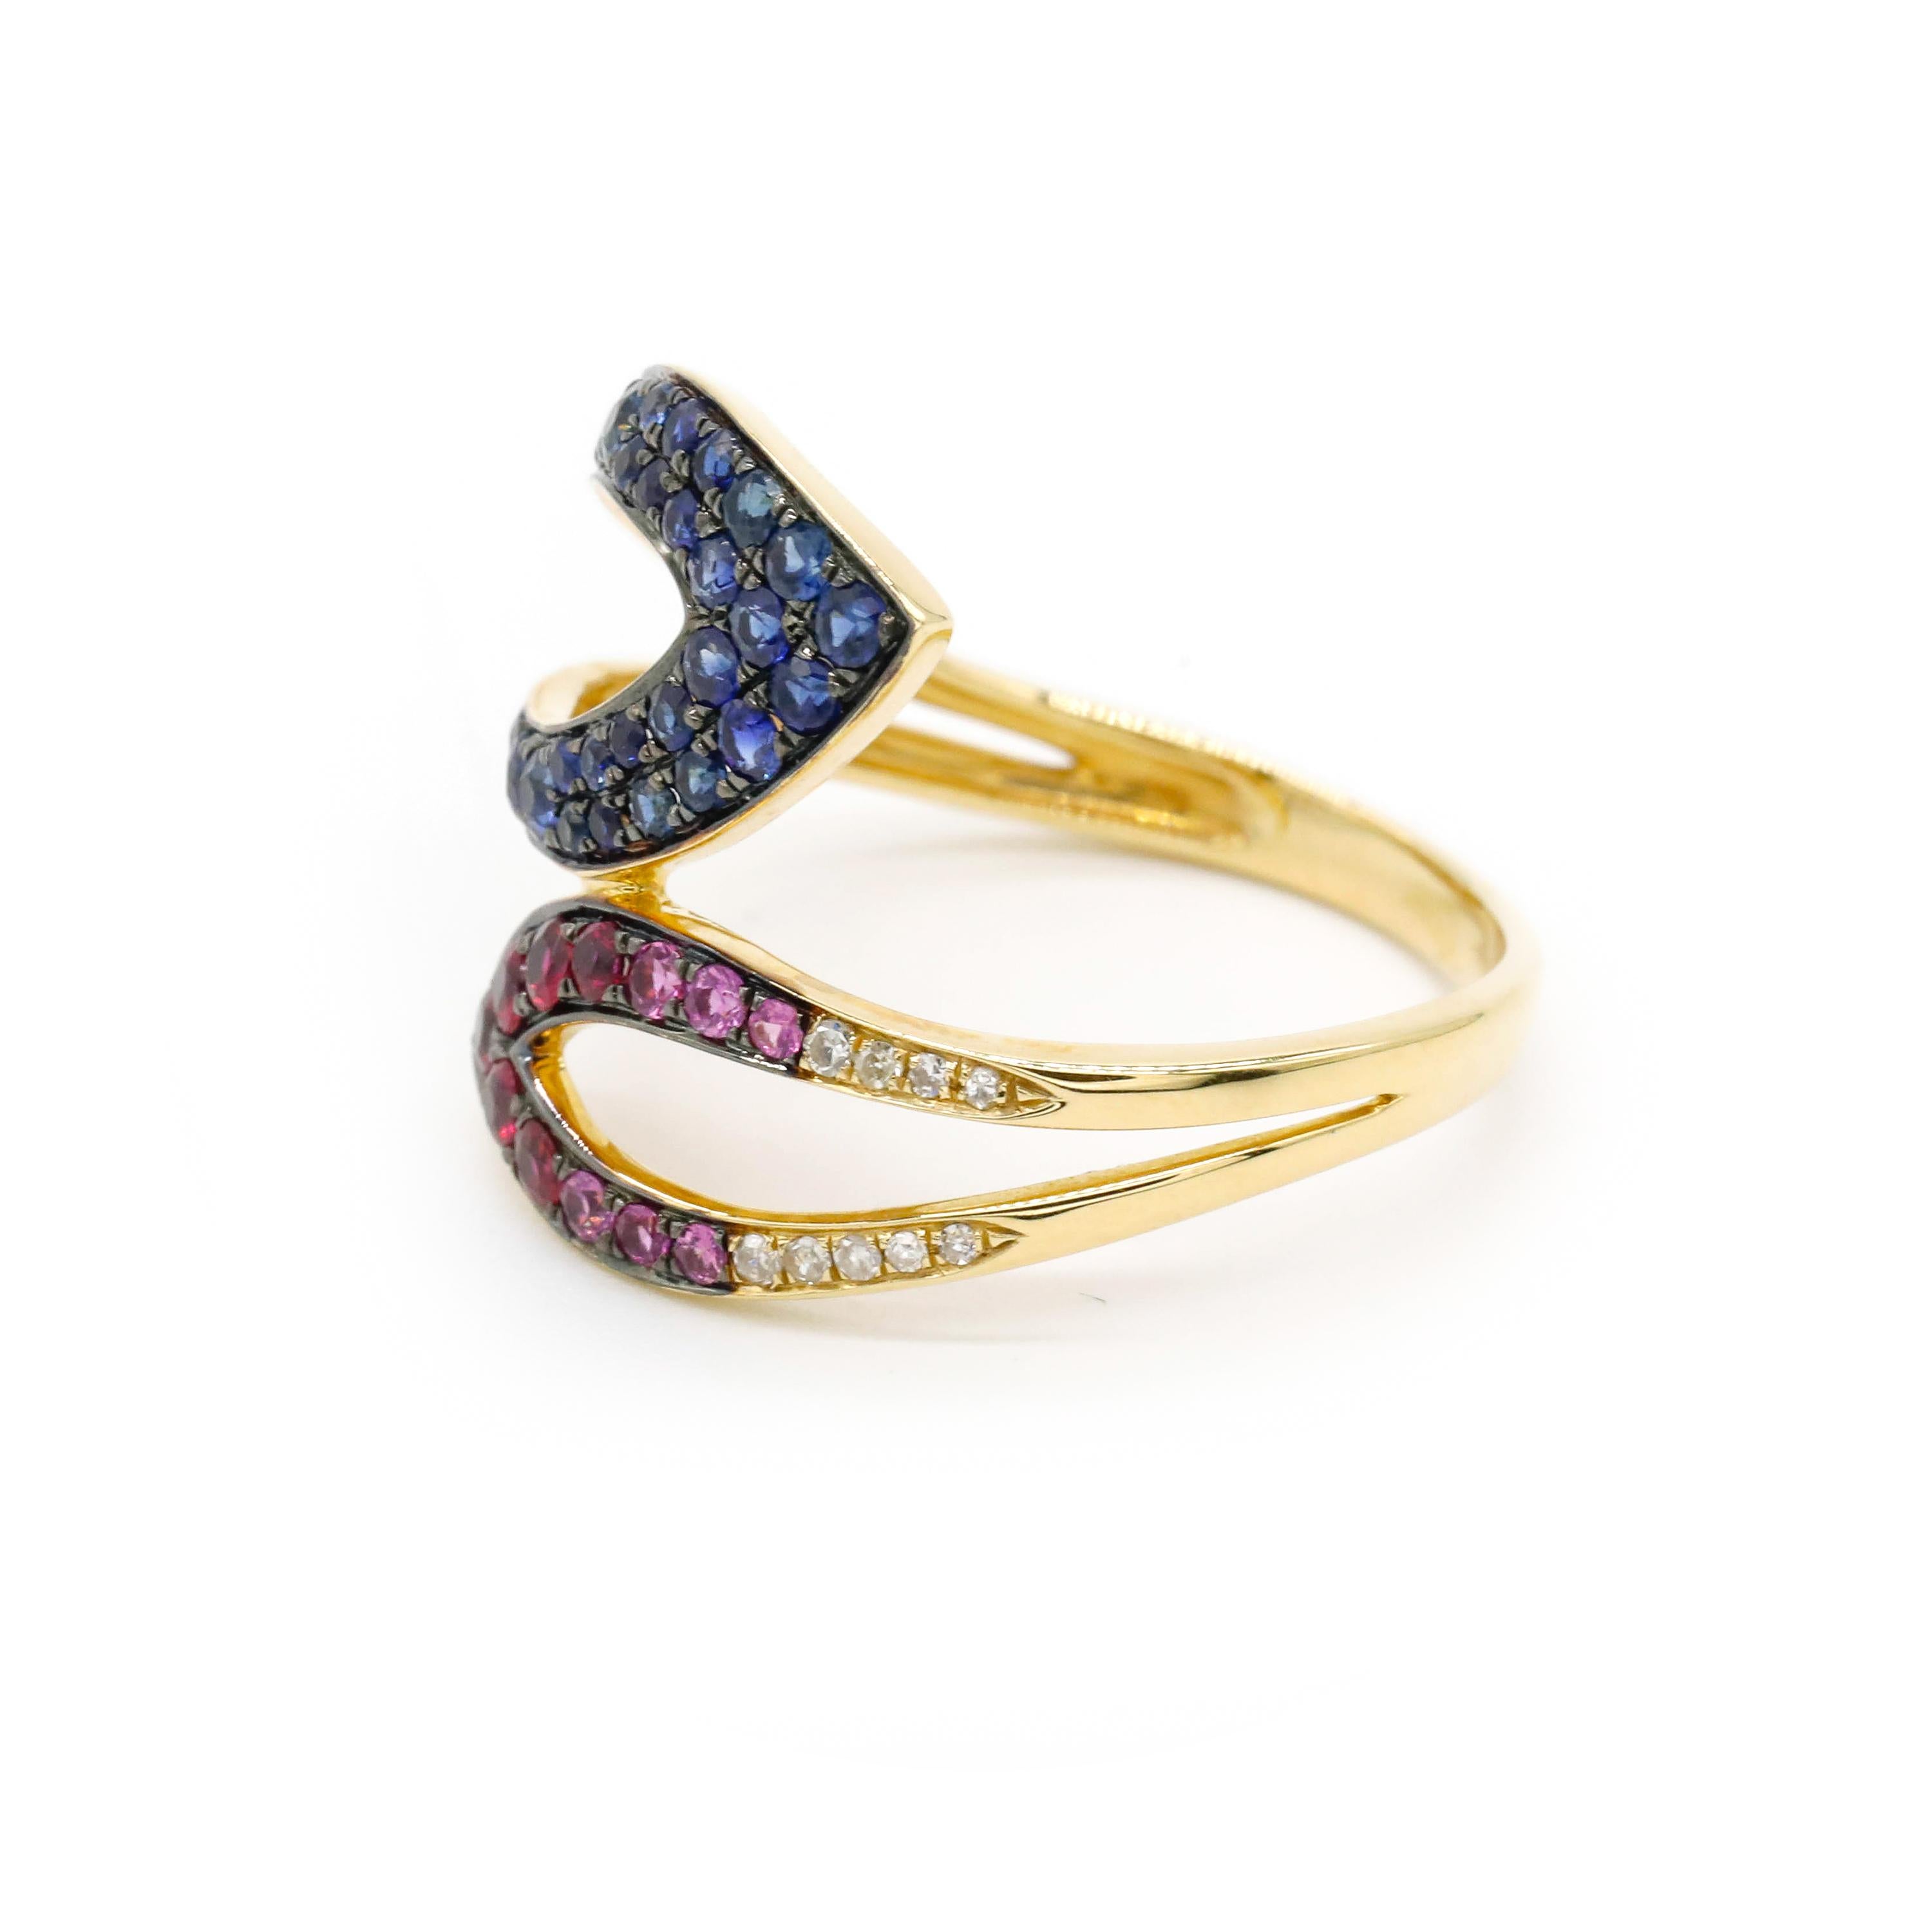 0.14 Carat Round Cut Diamond 0.31 Carat Blue Sapphire 14k Yellow Gold Wrap Ring

A wedding band or an Anniversary ring - this ring is just perfection. Featuring a single row of 0.31 Carat natural pink and blue sapphire stones , set in a Pave